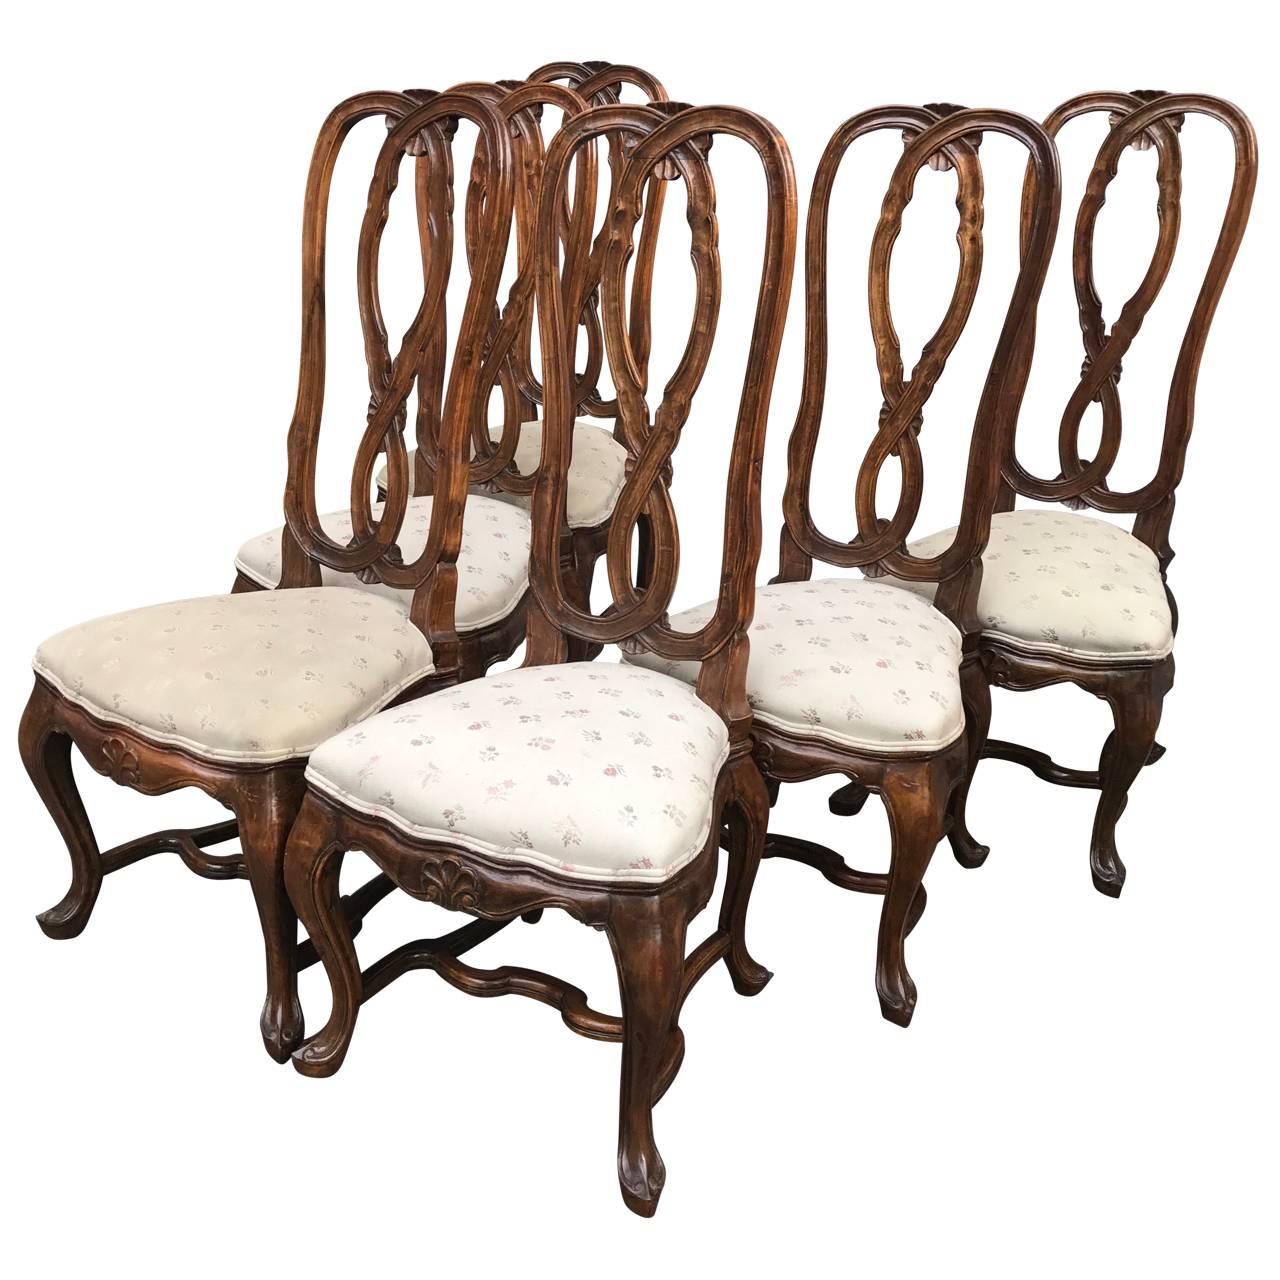 Set of six Rococo-style dining room chairs with relatively tall back.

$145 flat rate front door delivery includes Washington DC metro, Baltimore and Philadelphia